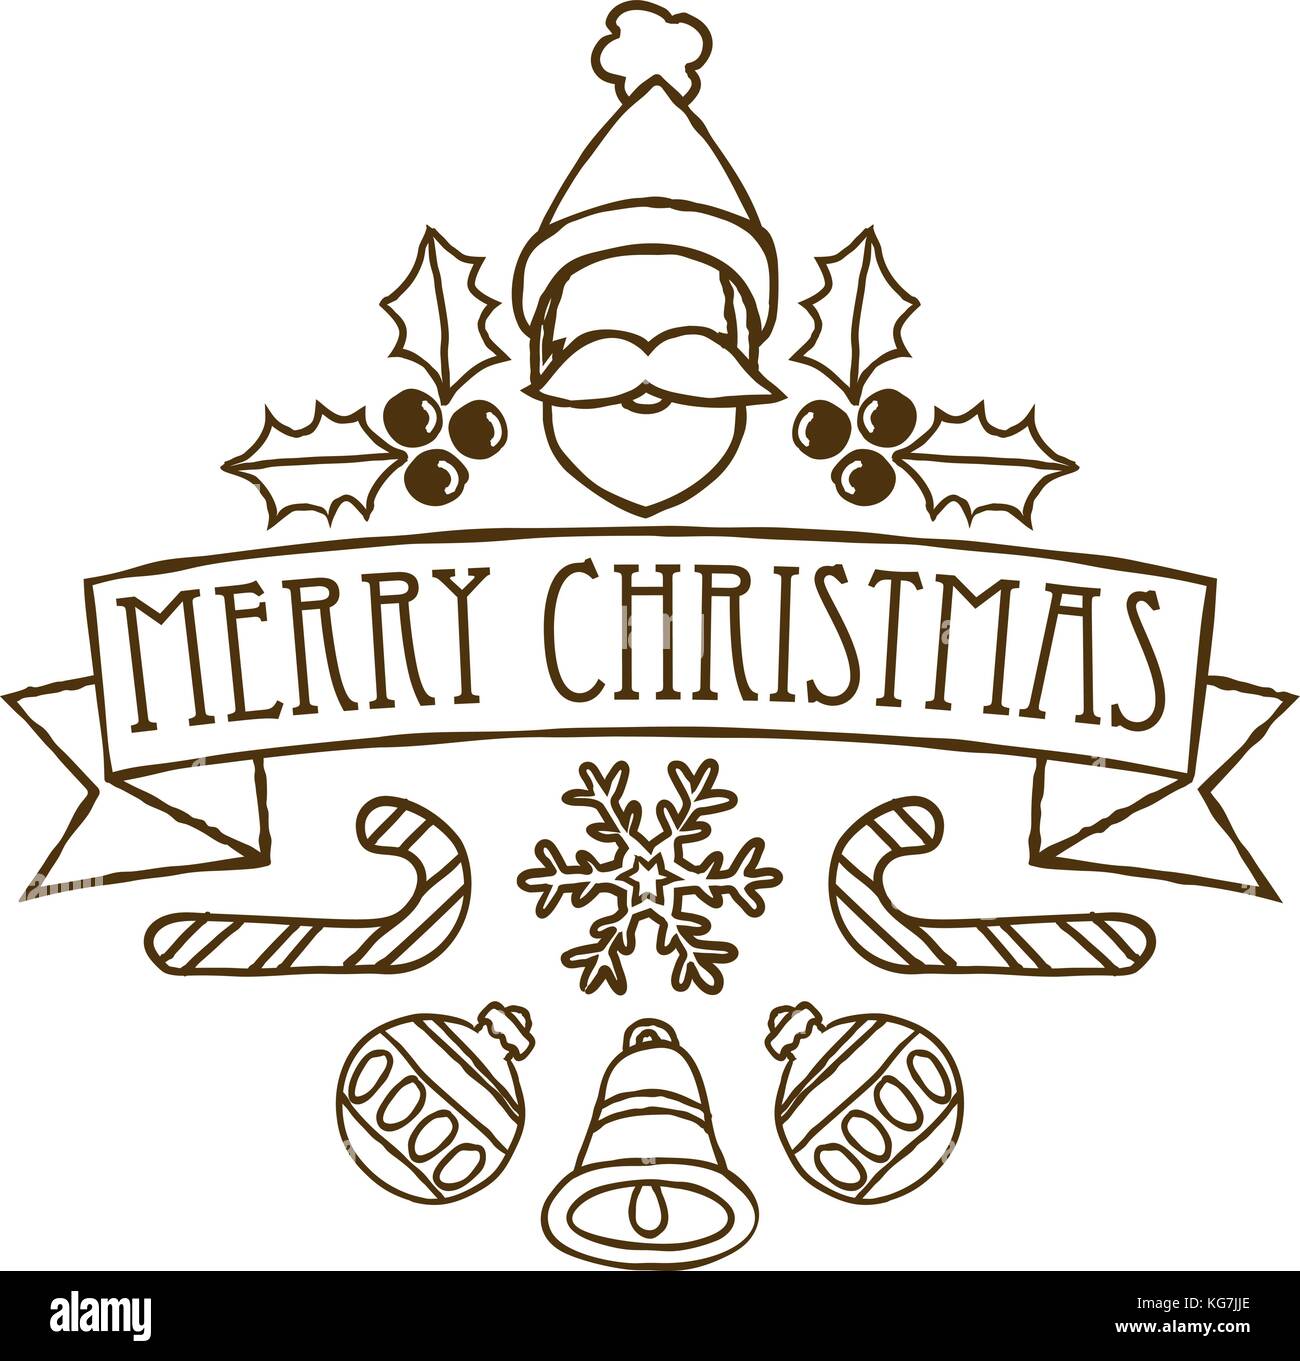 Merry Christmas Greetings Holiday Design Stock Vector